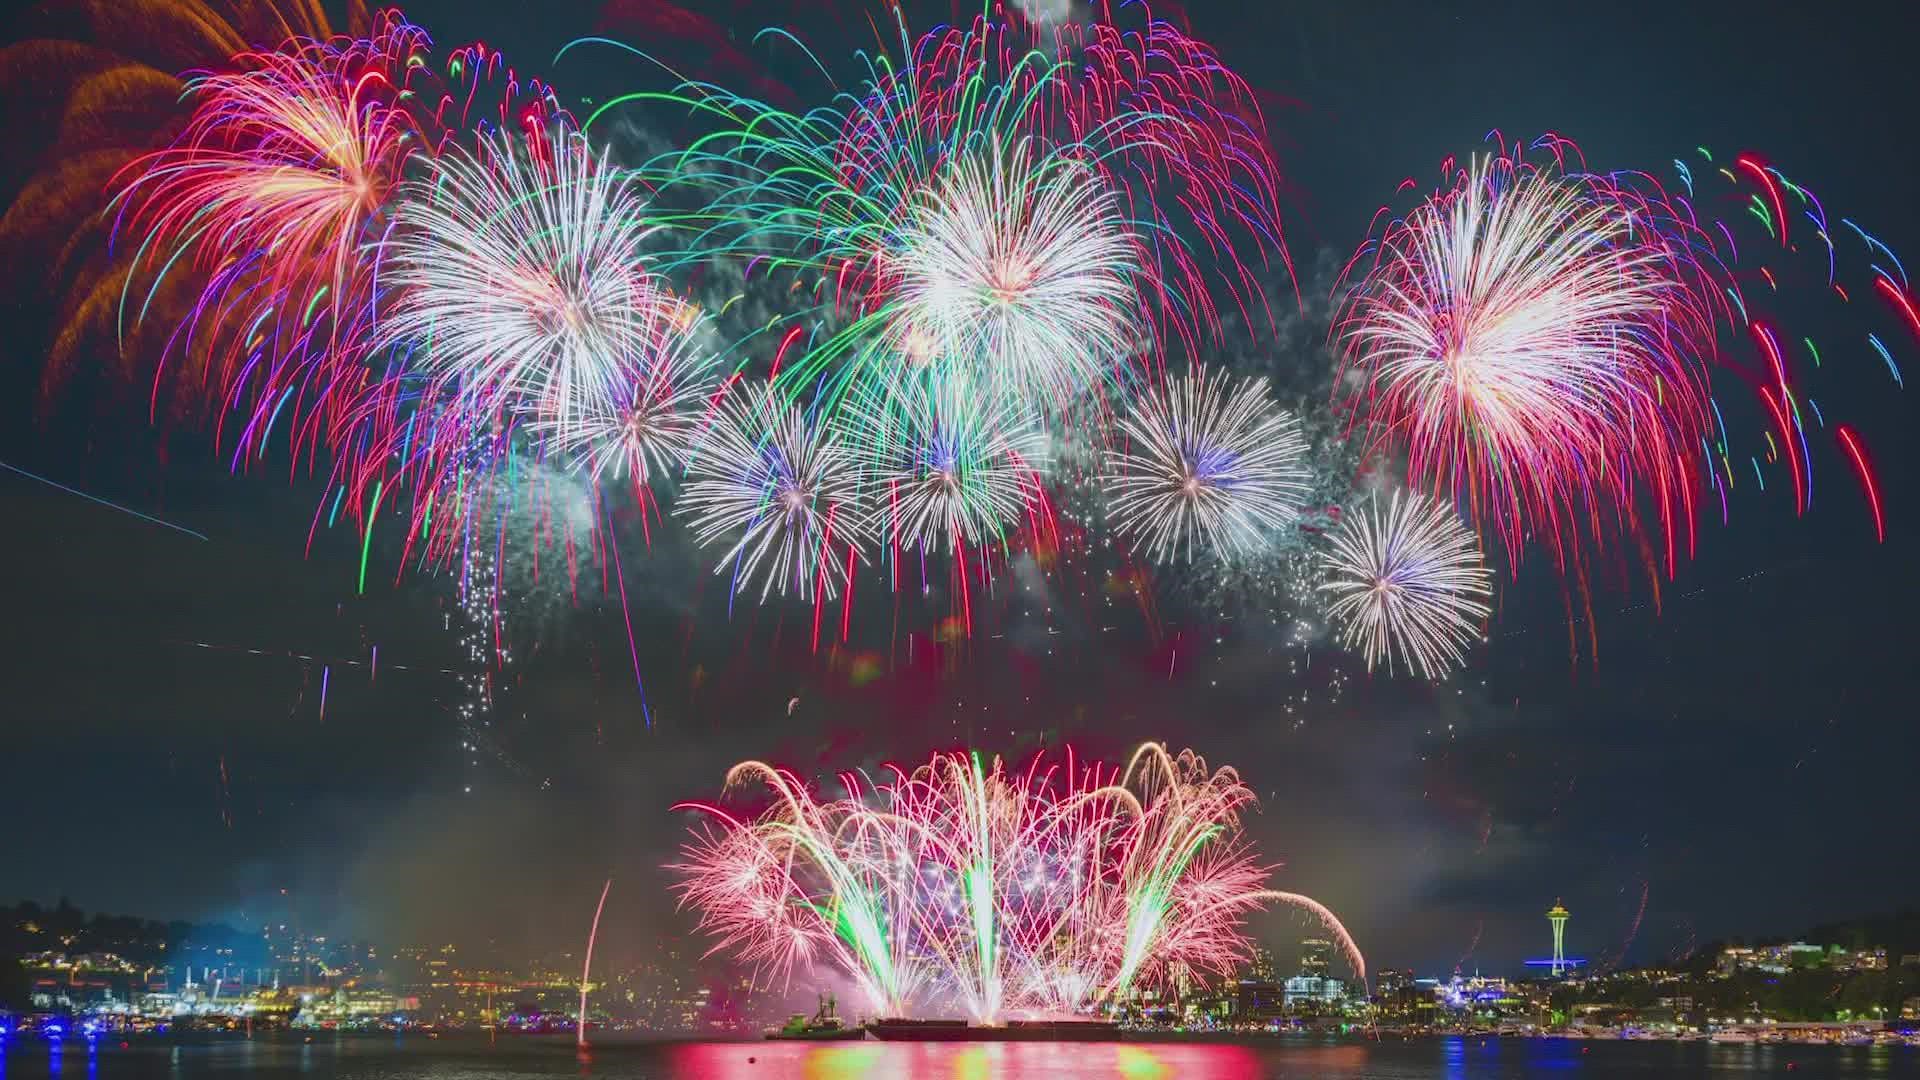 The Seafair fireworks show returned after a three year hiatus, and Tim Durkan's photos prove it was a sight to behold.